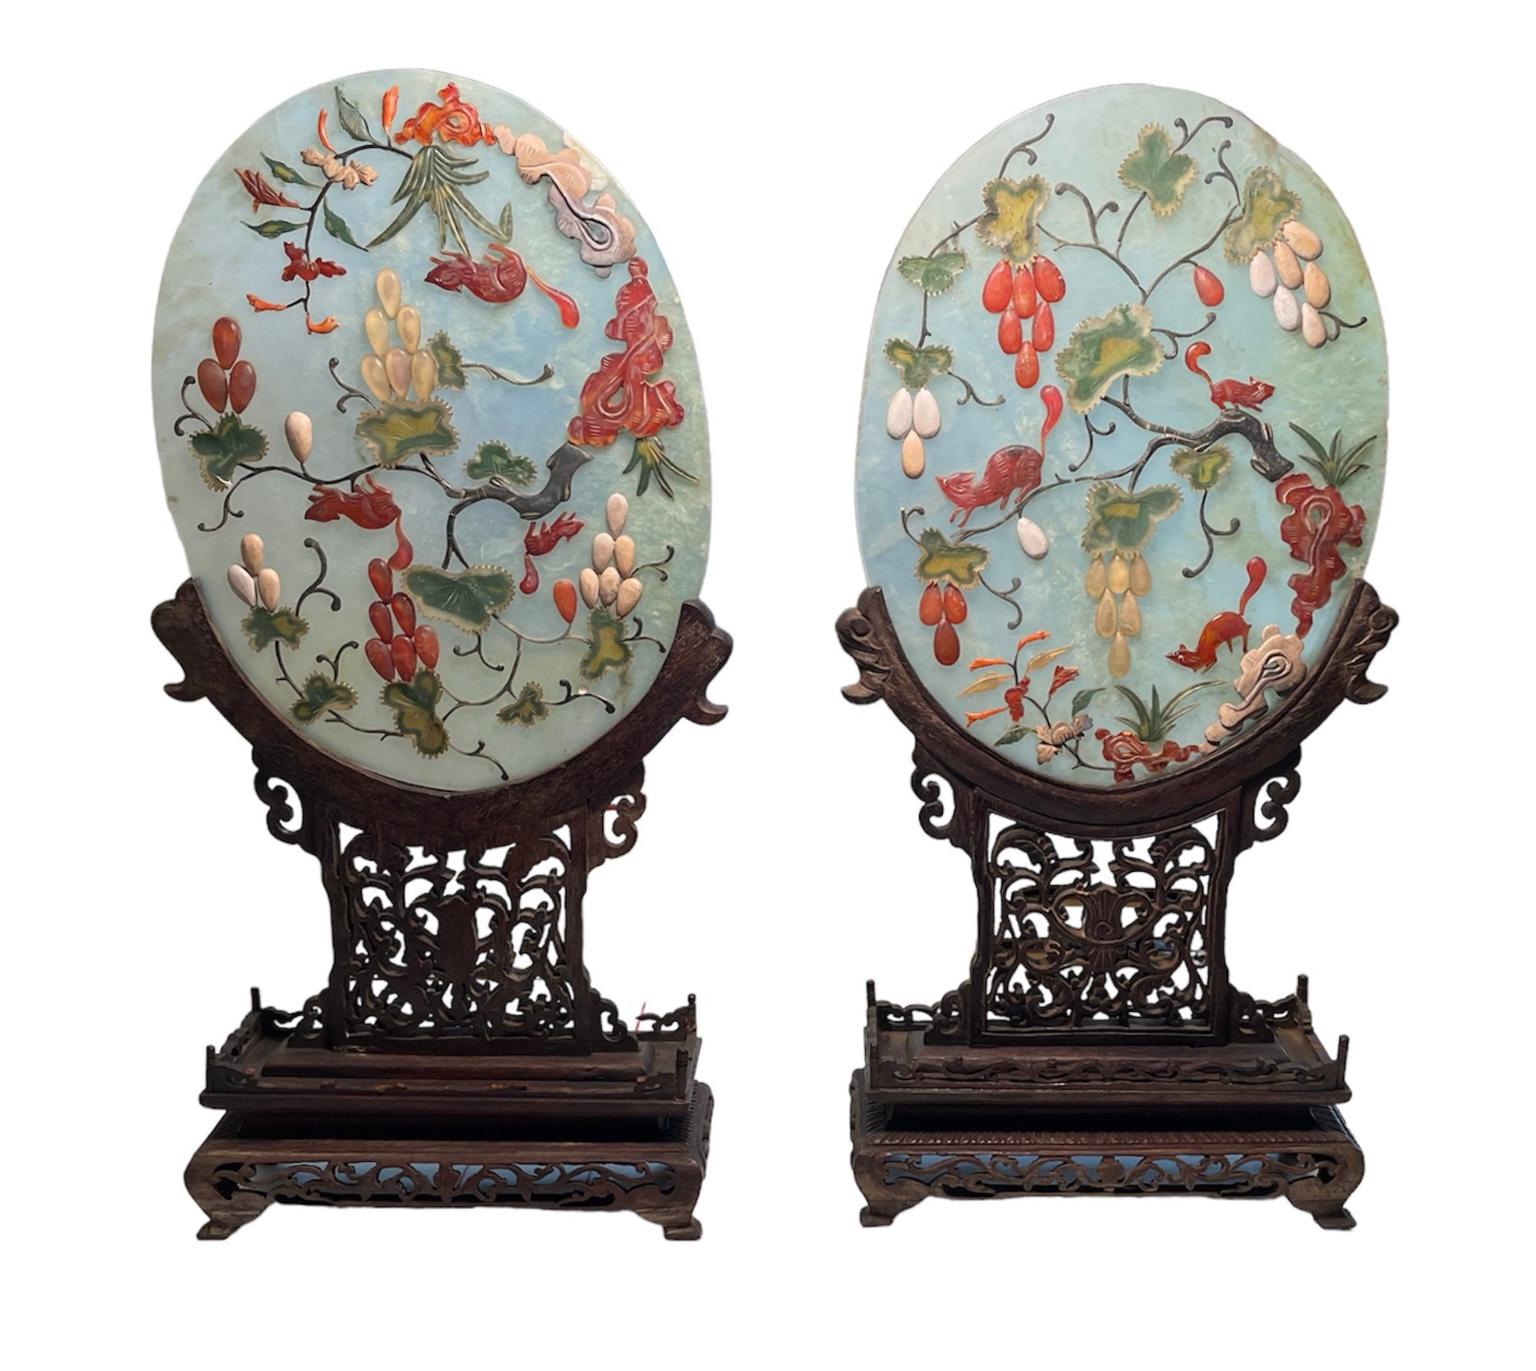 This is a 19th century pair of Chinese hand carved oval jade and hard stone table screens with wood stands. They depict a semitransparent large egg shaped jade plaque adorned with a relief of grapes vines like branches of flowers made of agate, jade